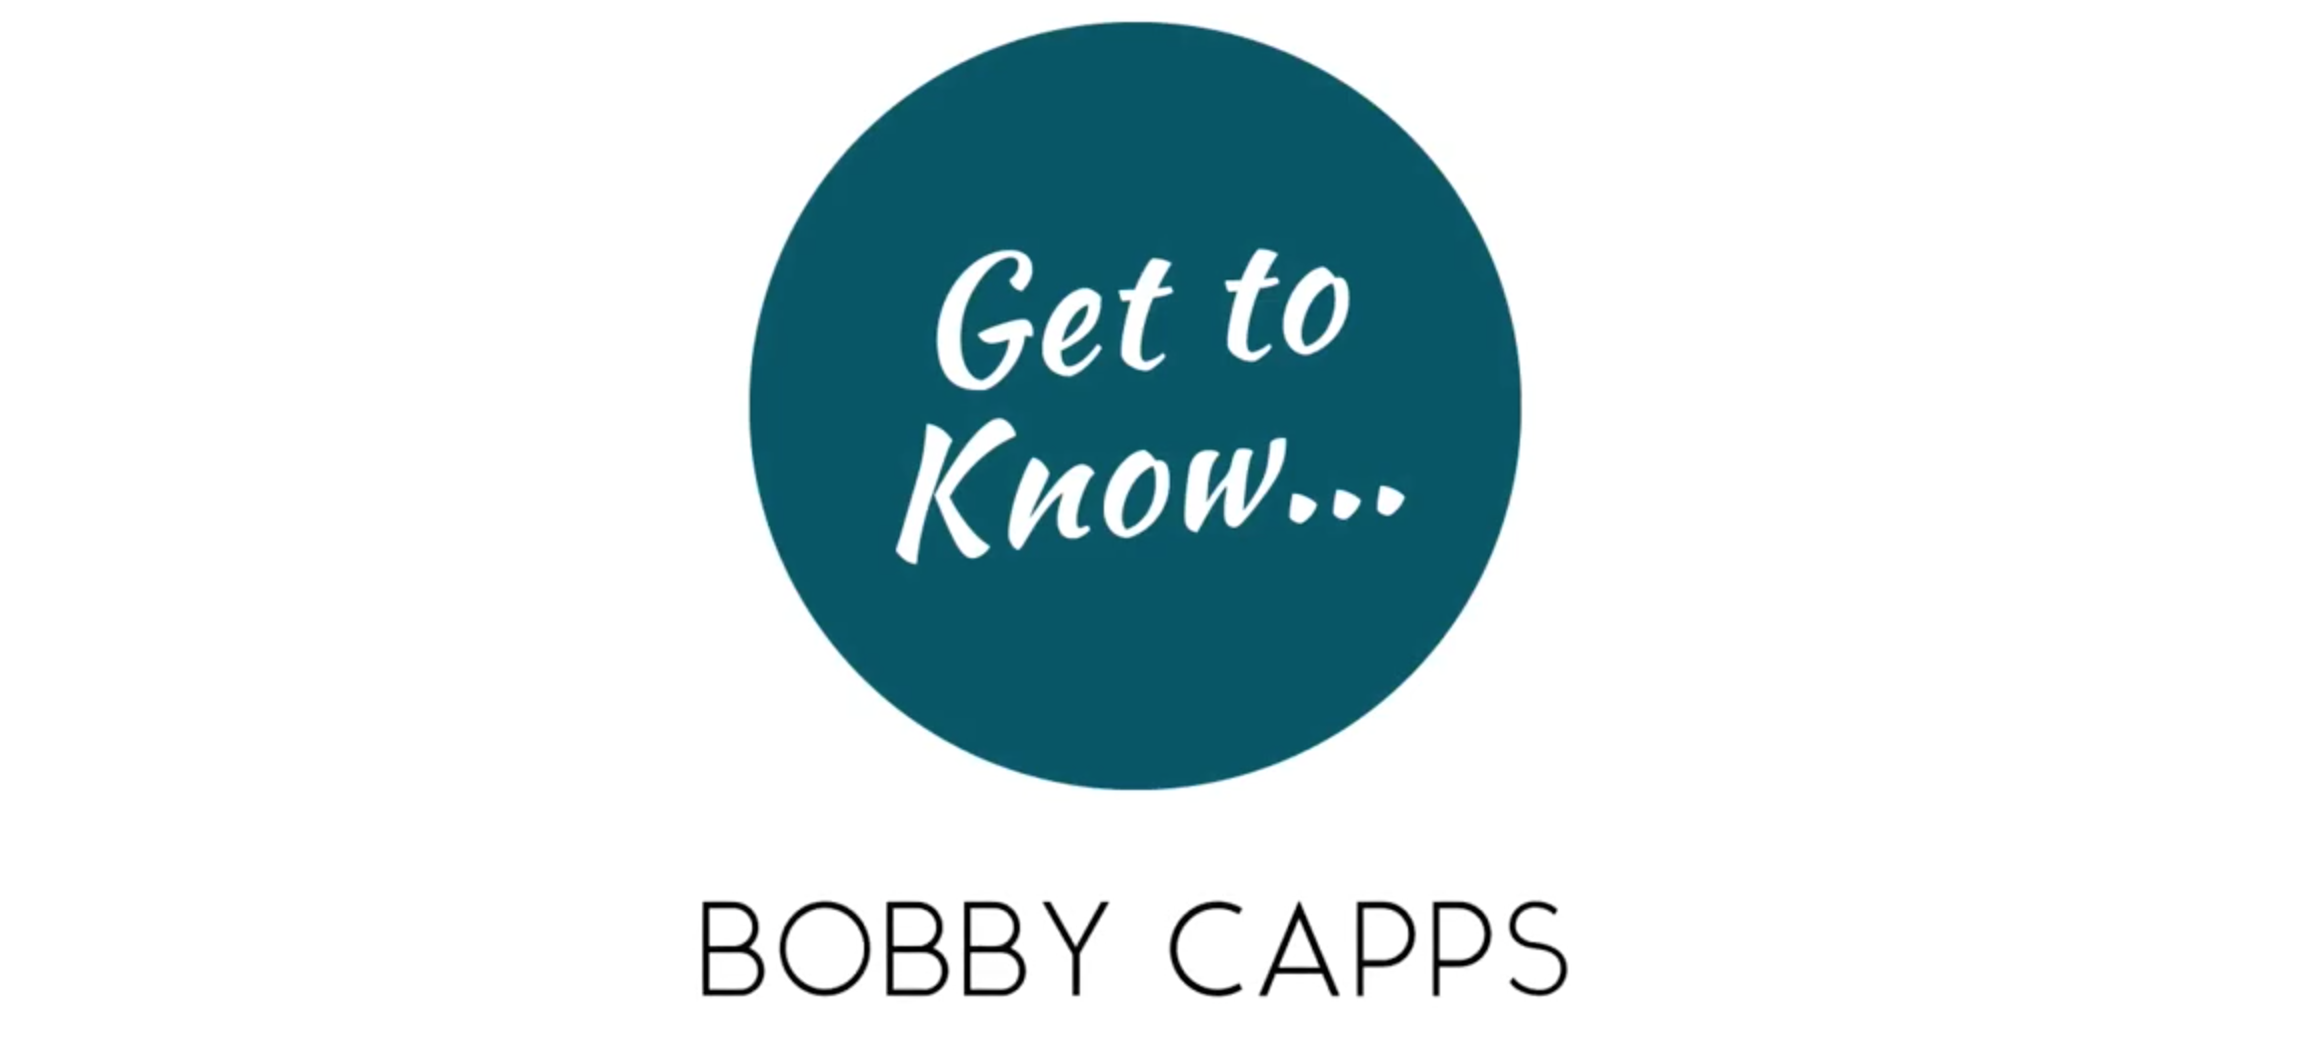 VIDEO: Get to Know…Bobby Capps